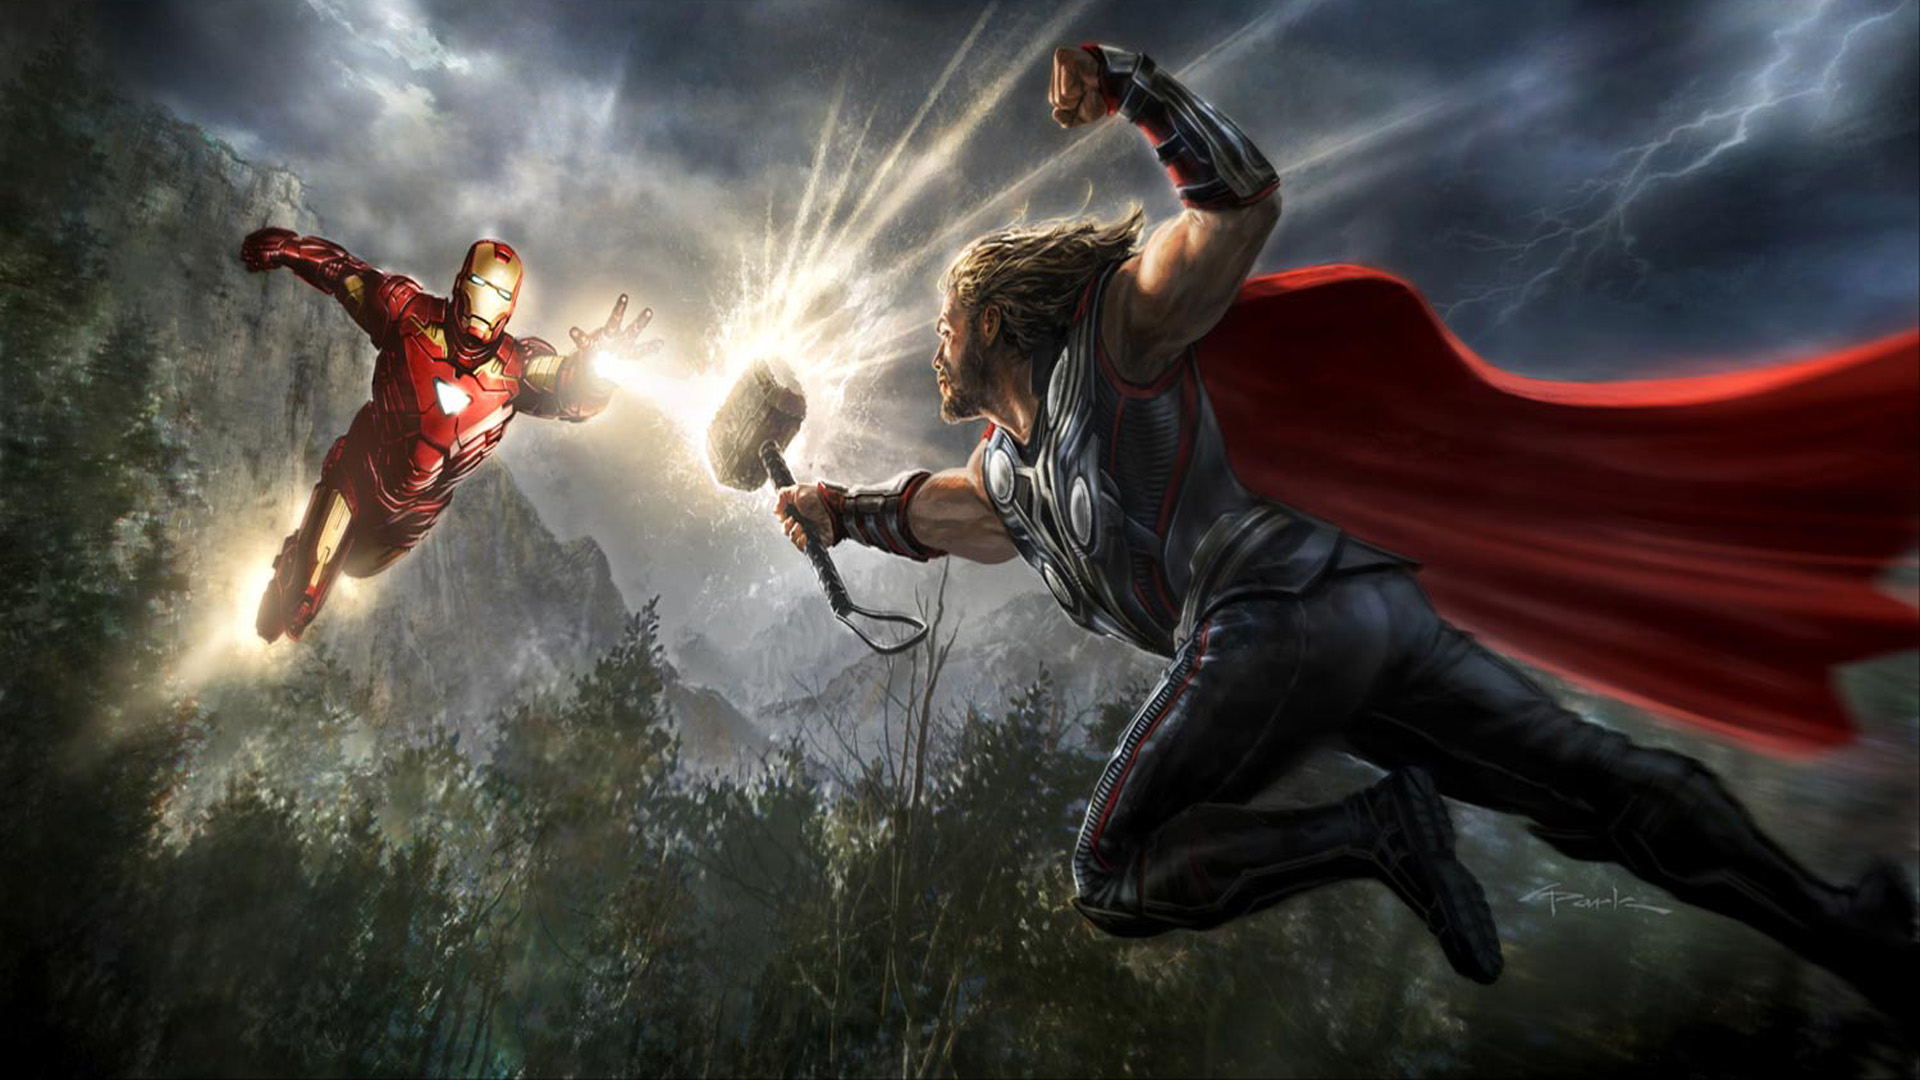 Thor And Iron Man The Avengers Marvel Movies Full Hd 